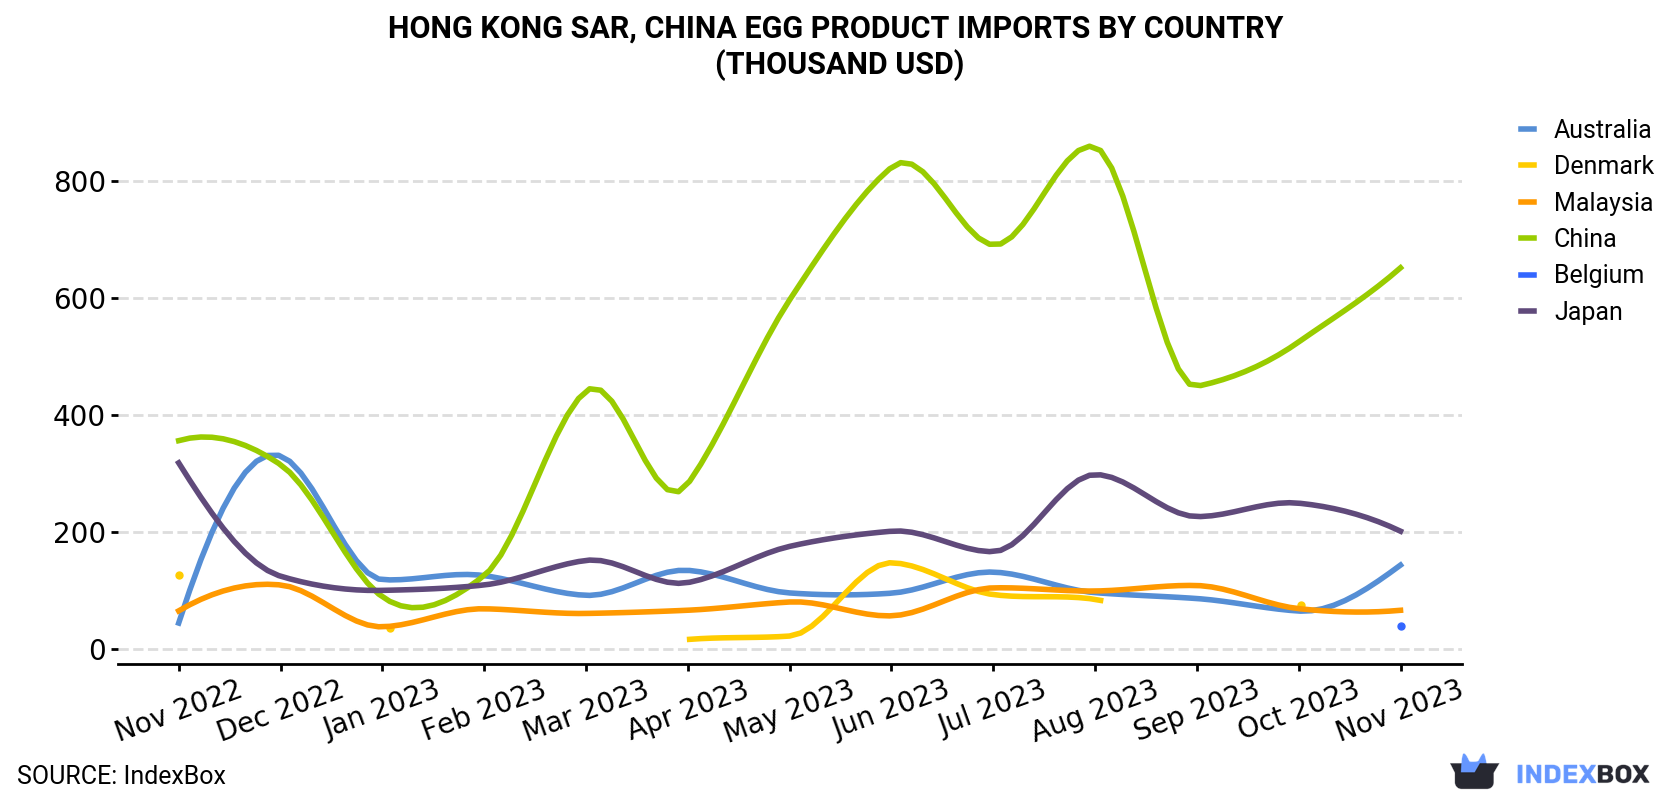 Hong Kong Egg Product Imports By Country (Thousand USD)